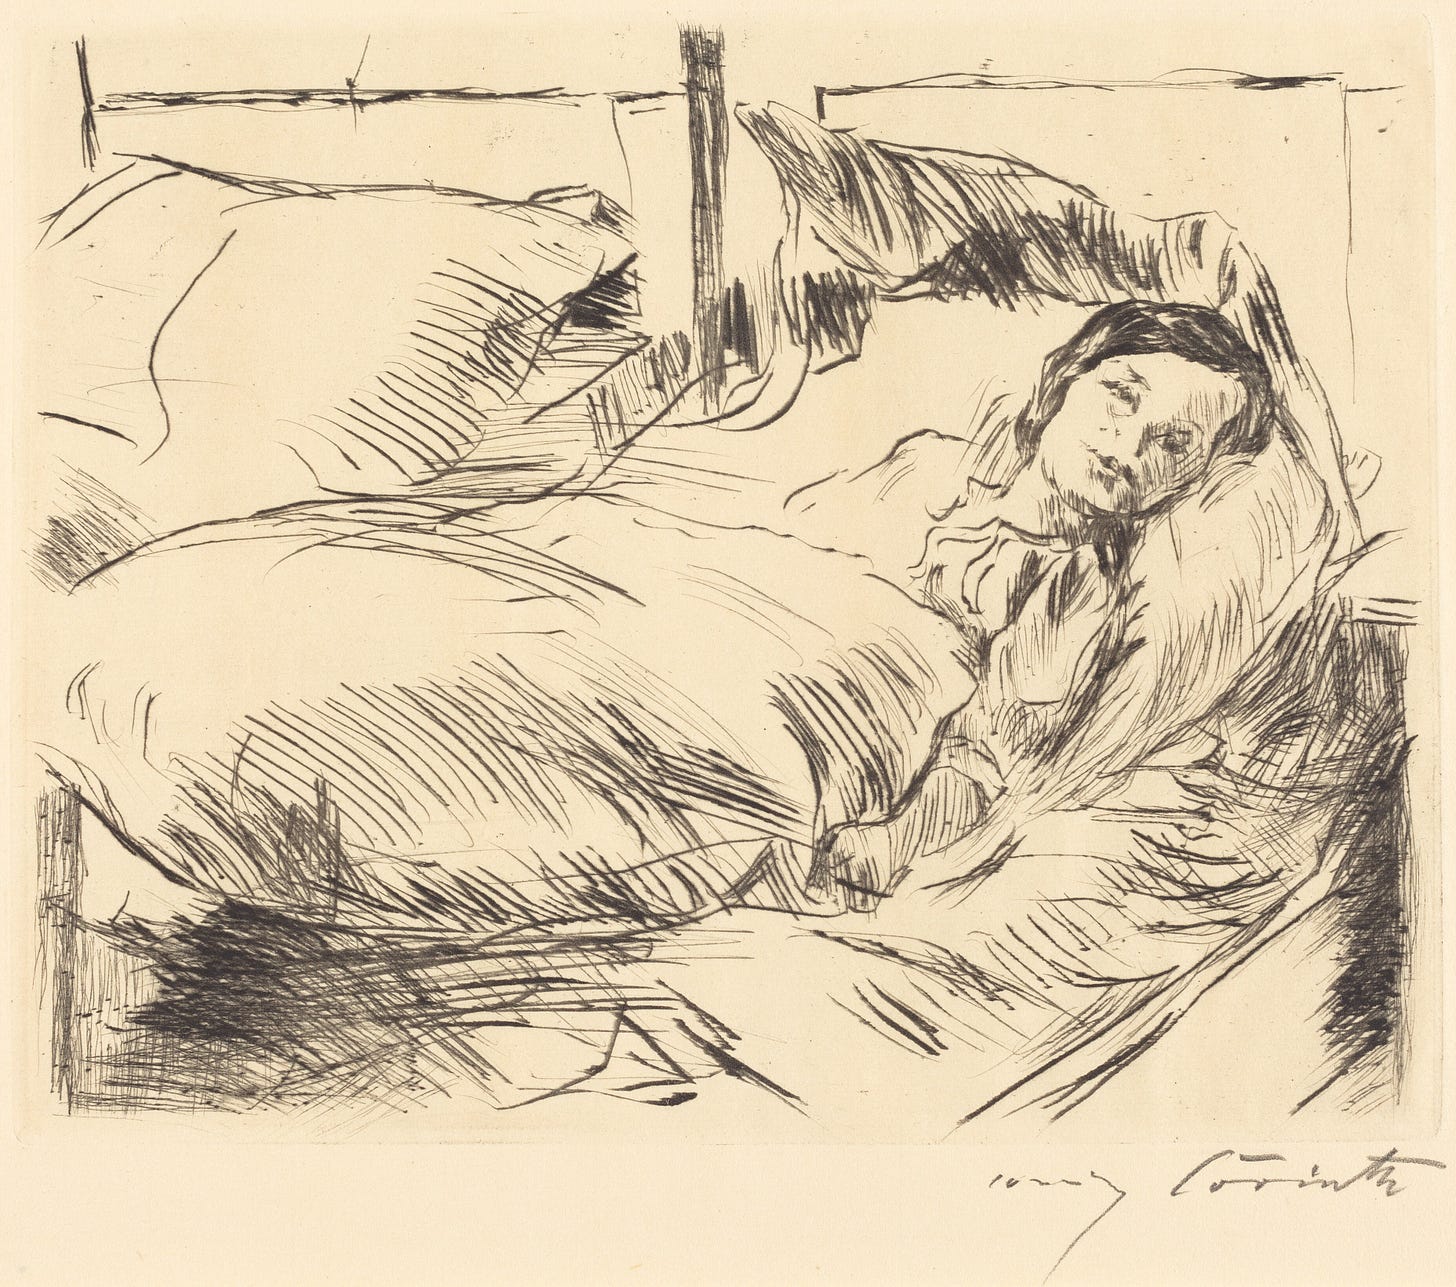 This is an ink-on-paper drawing of a sick child lying in bed.